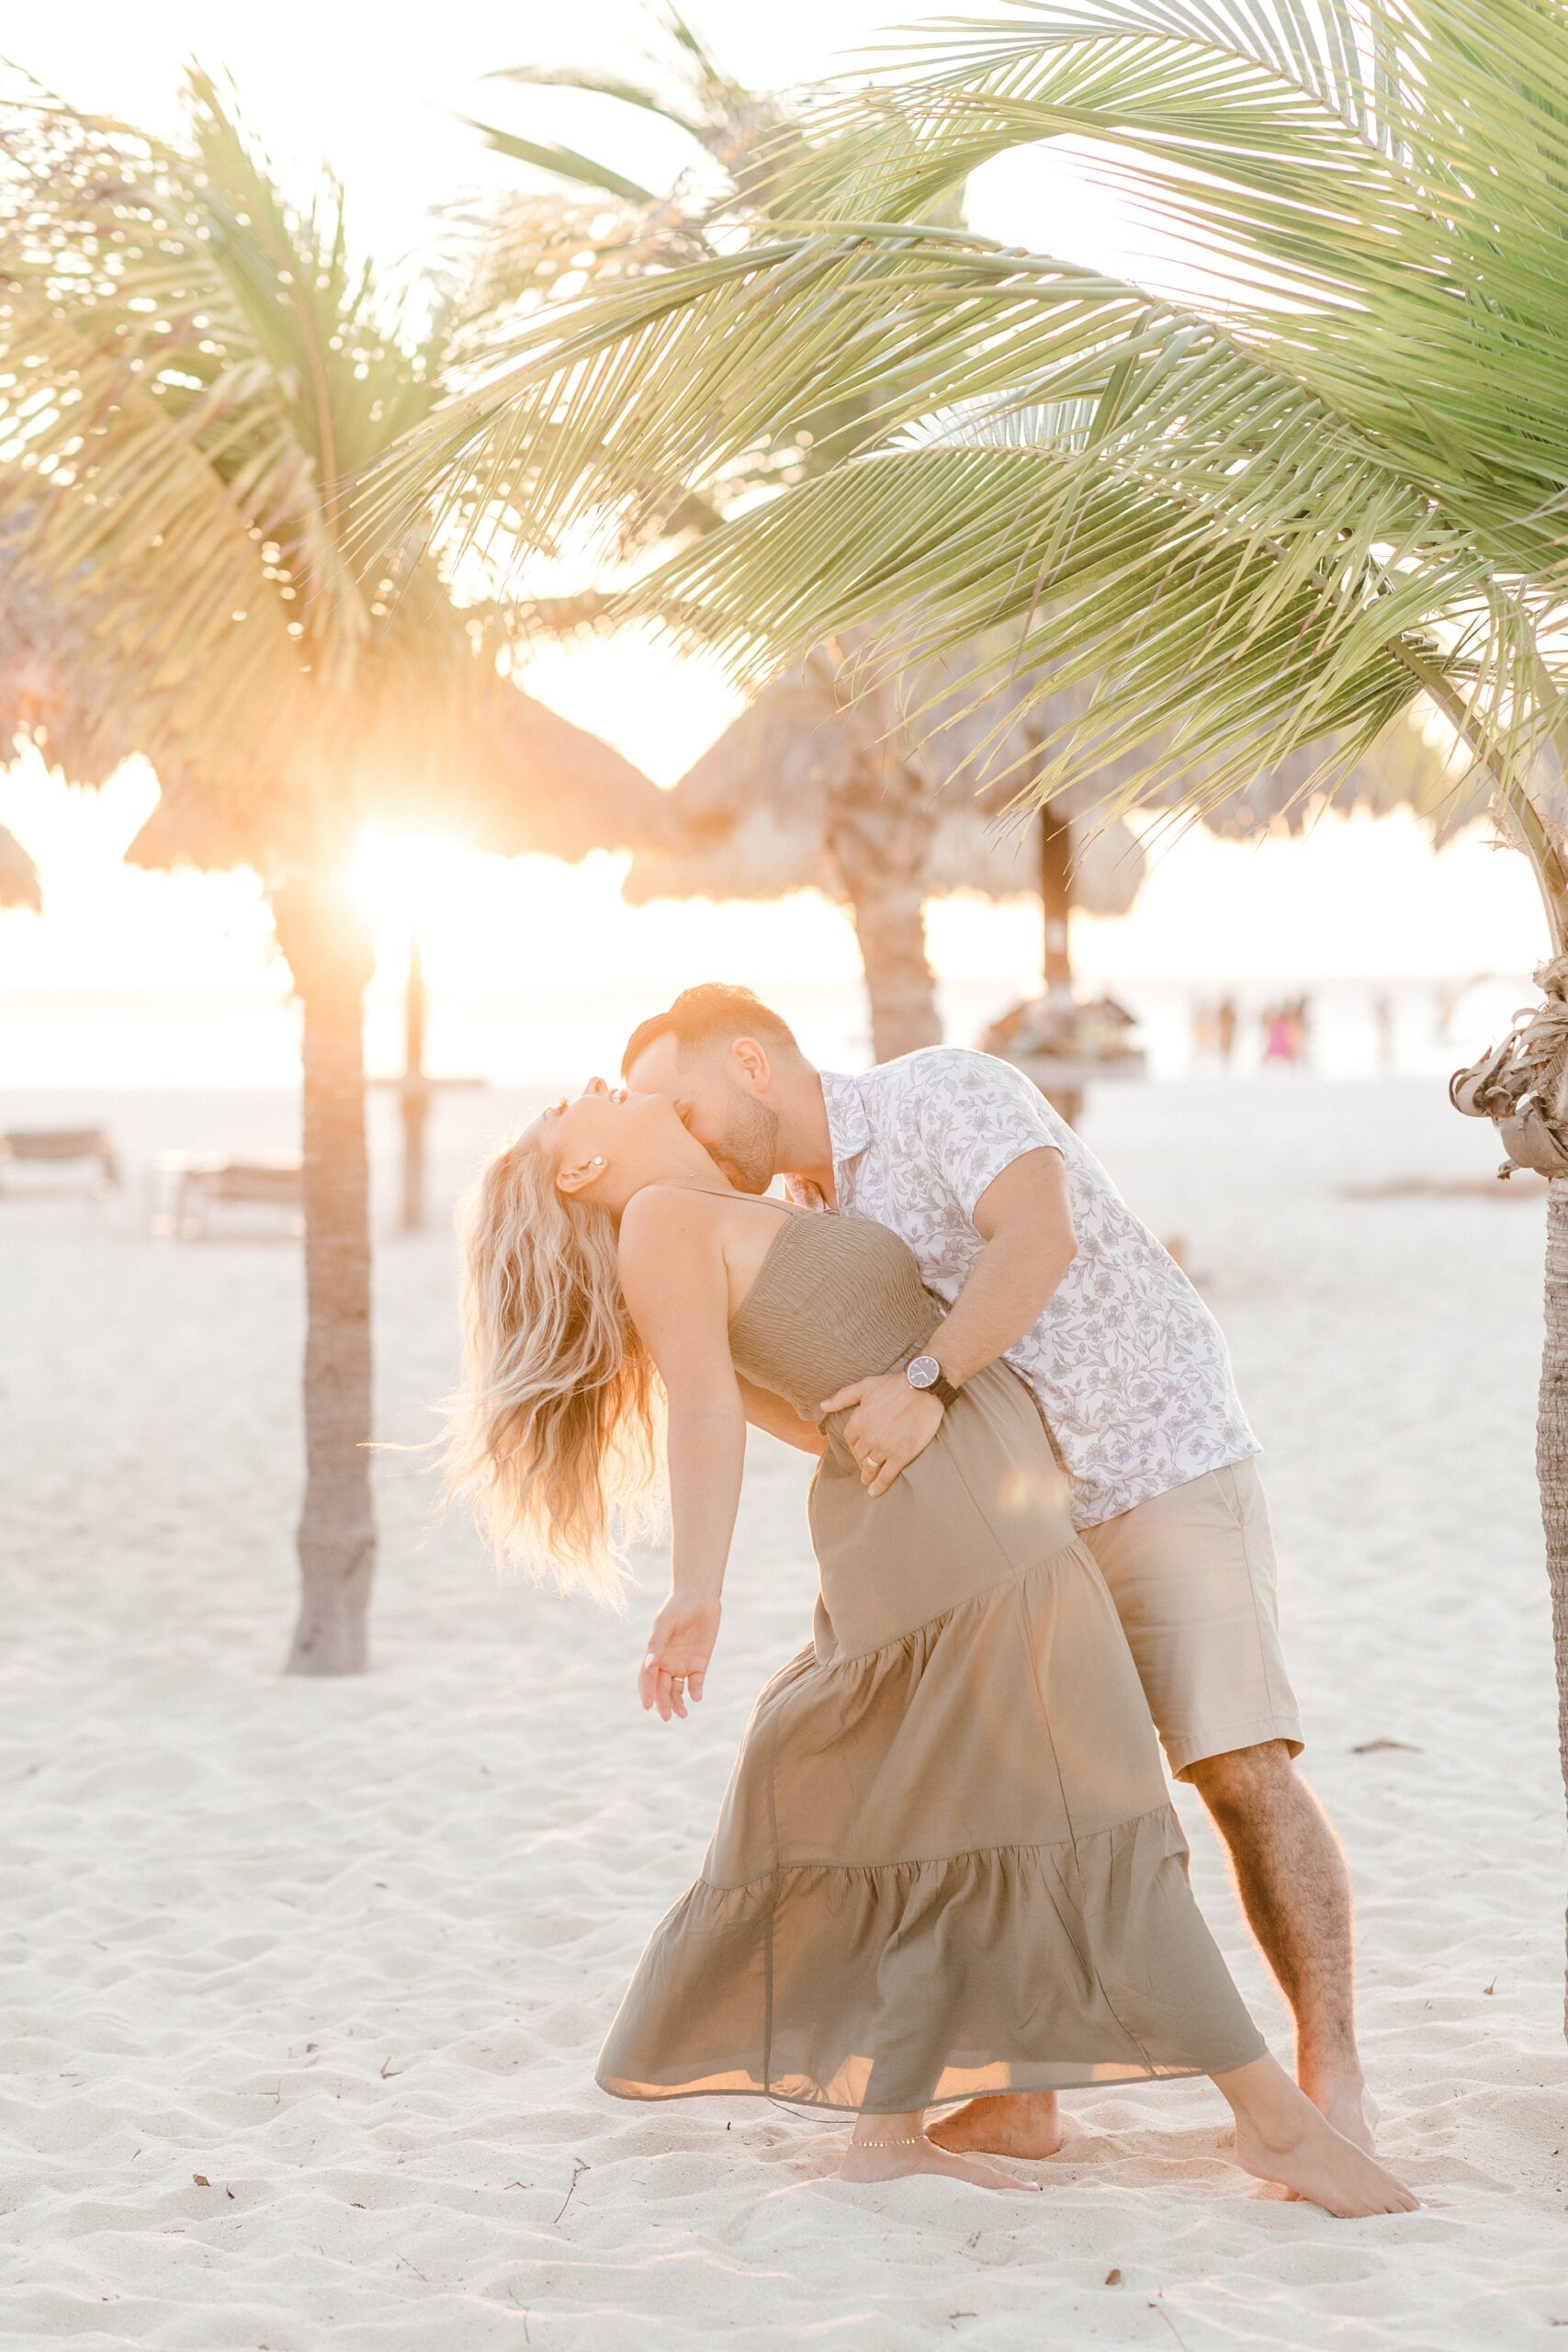 man kisses wife's throat on beach at sunset with trees through palm trees